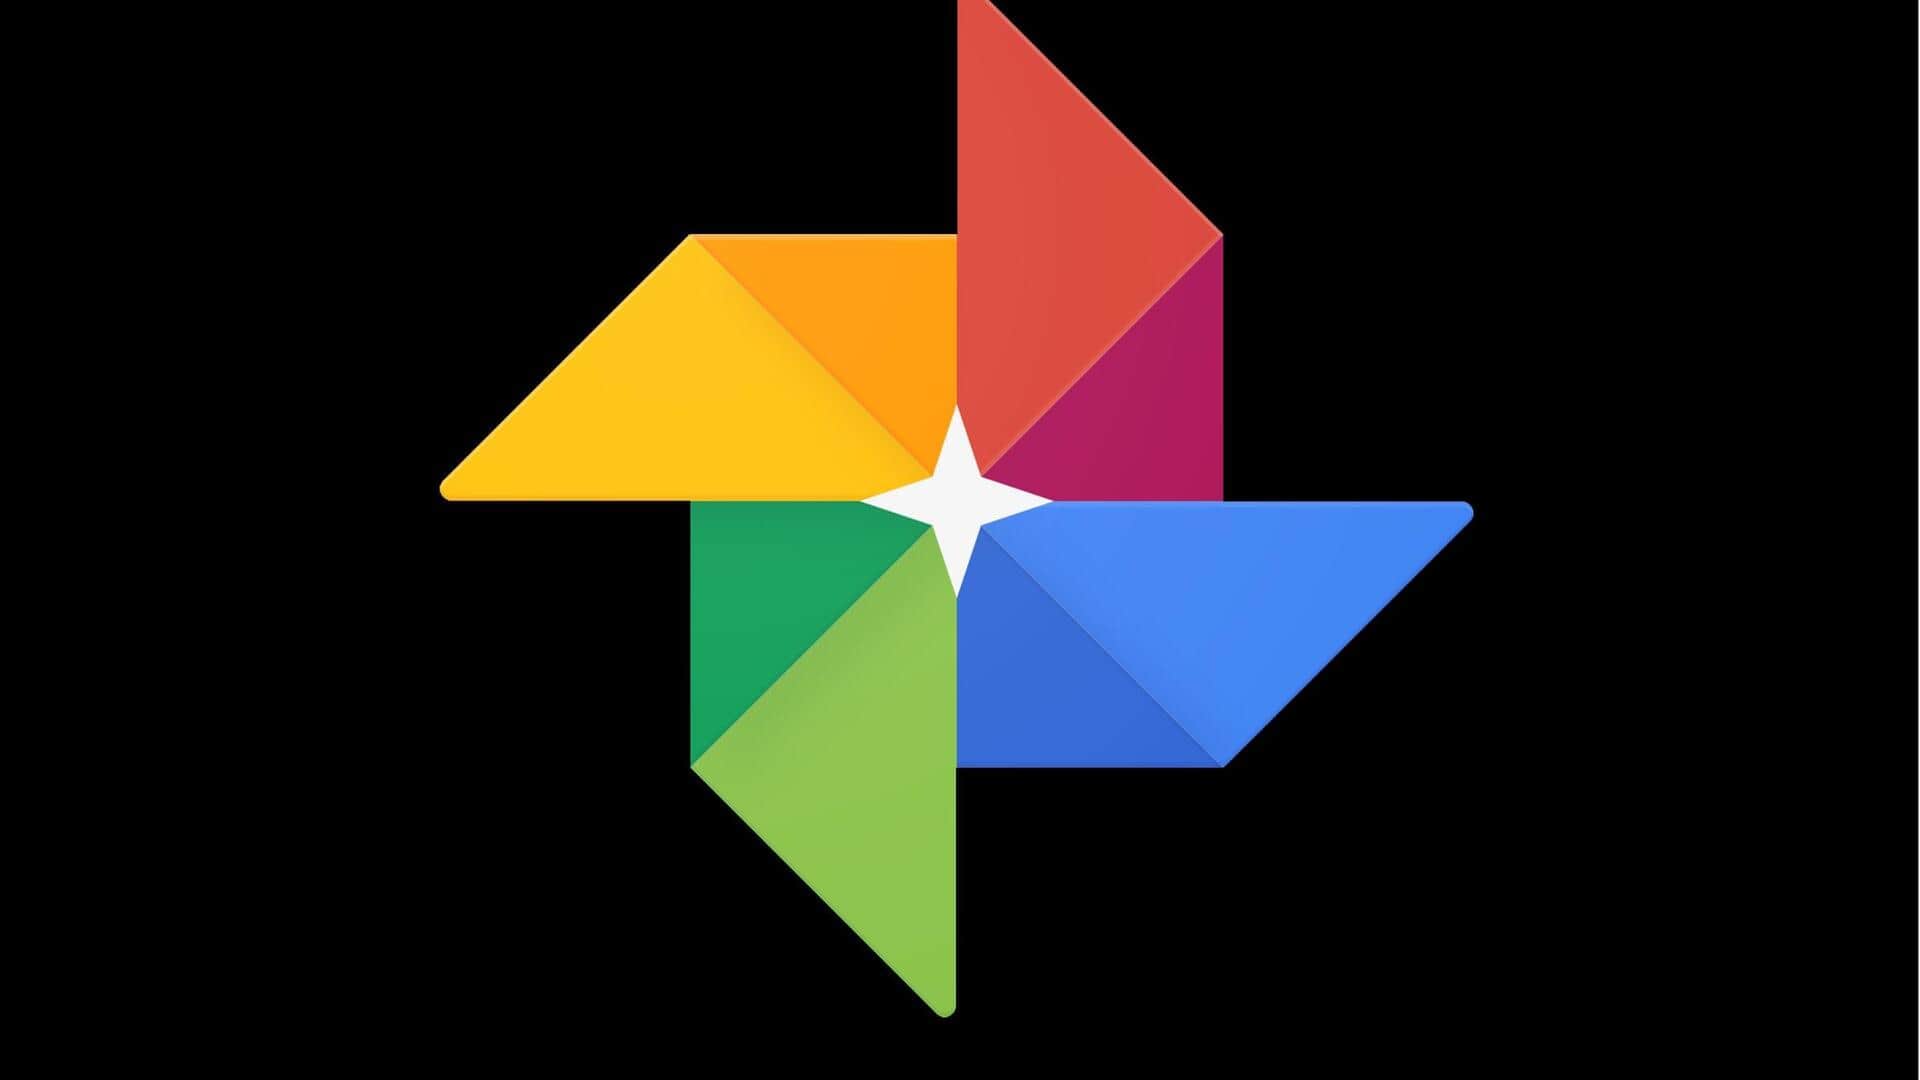 Google Photos rolls out with revamped design, updated Memories feed